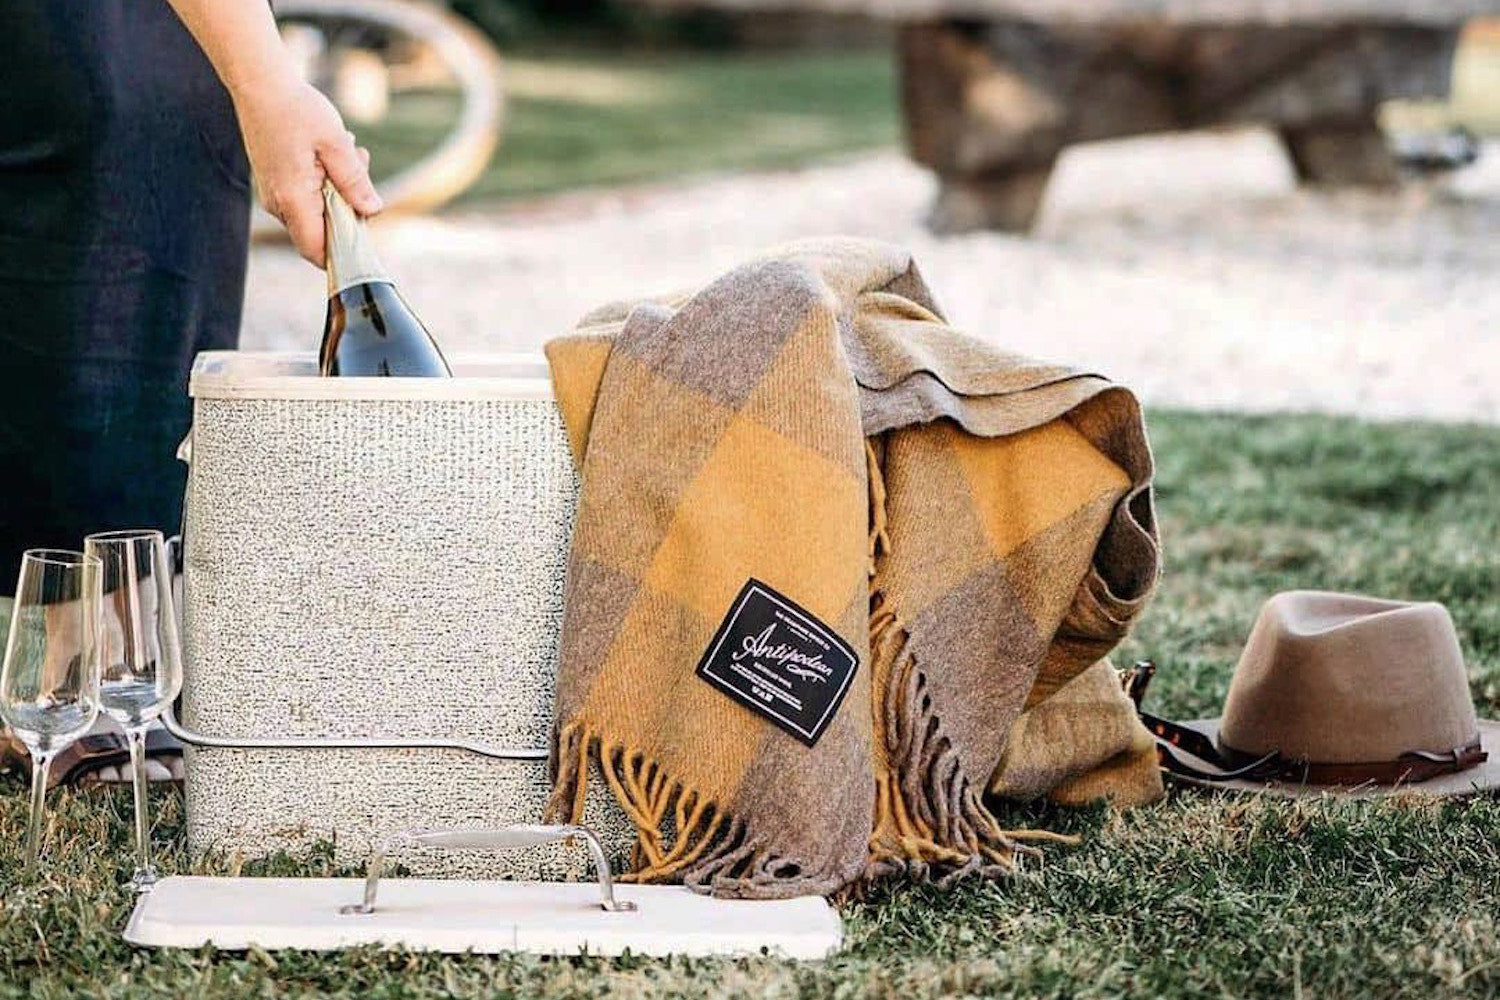 The Ultimate Picnic Packing List for a Luxurious Outdoor Adventure